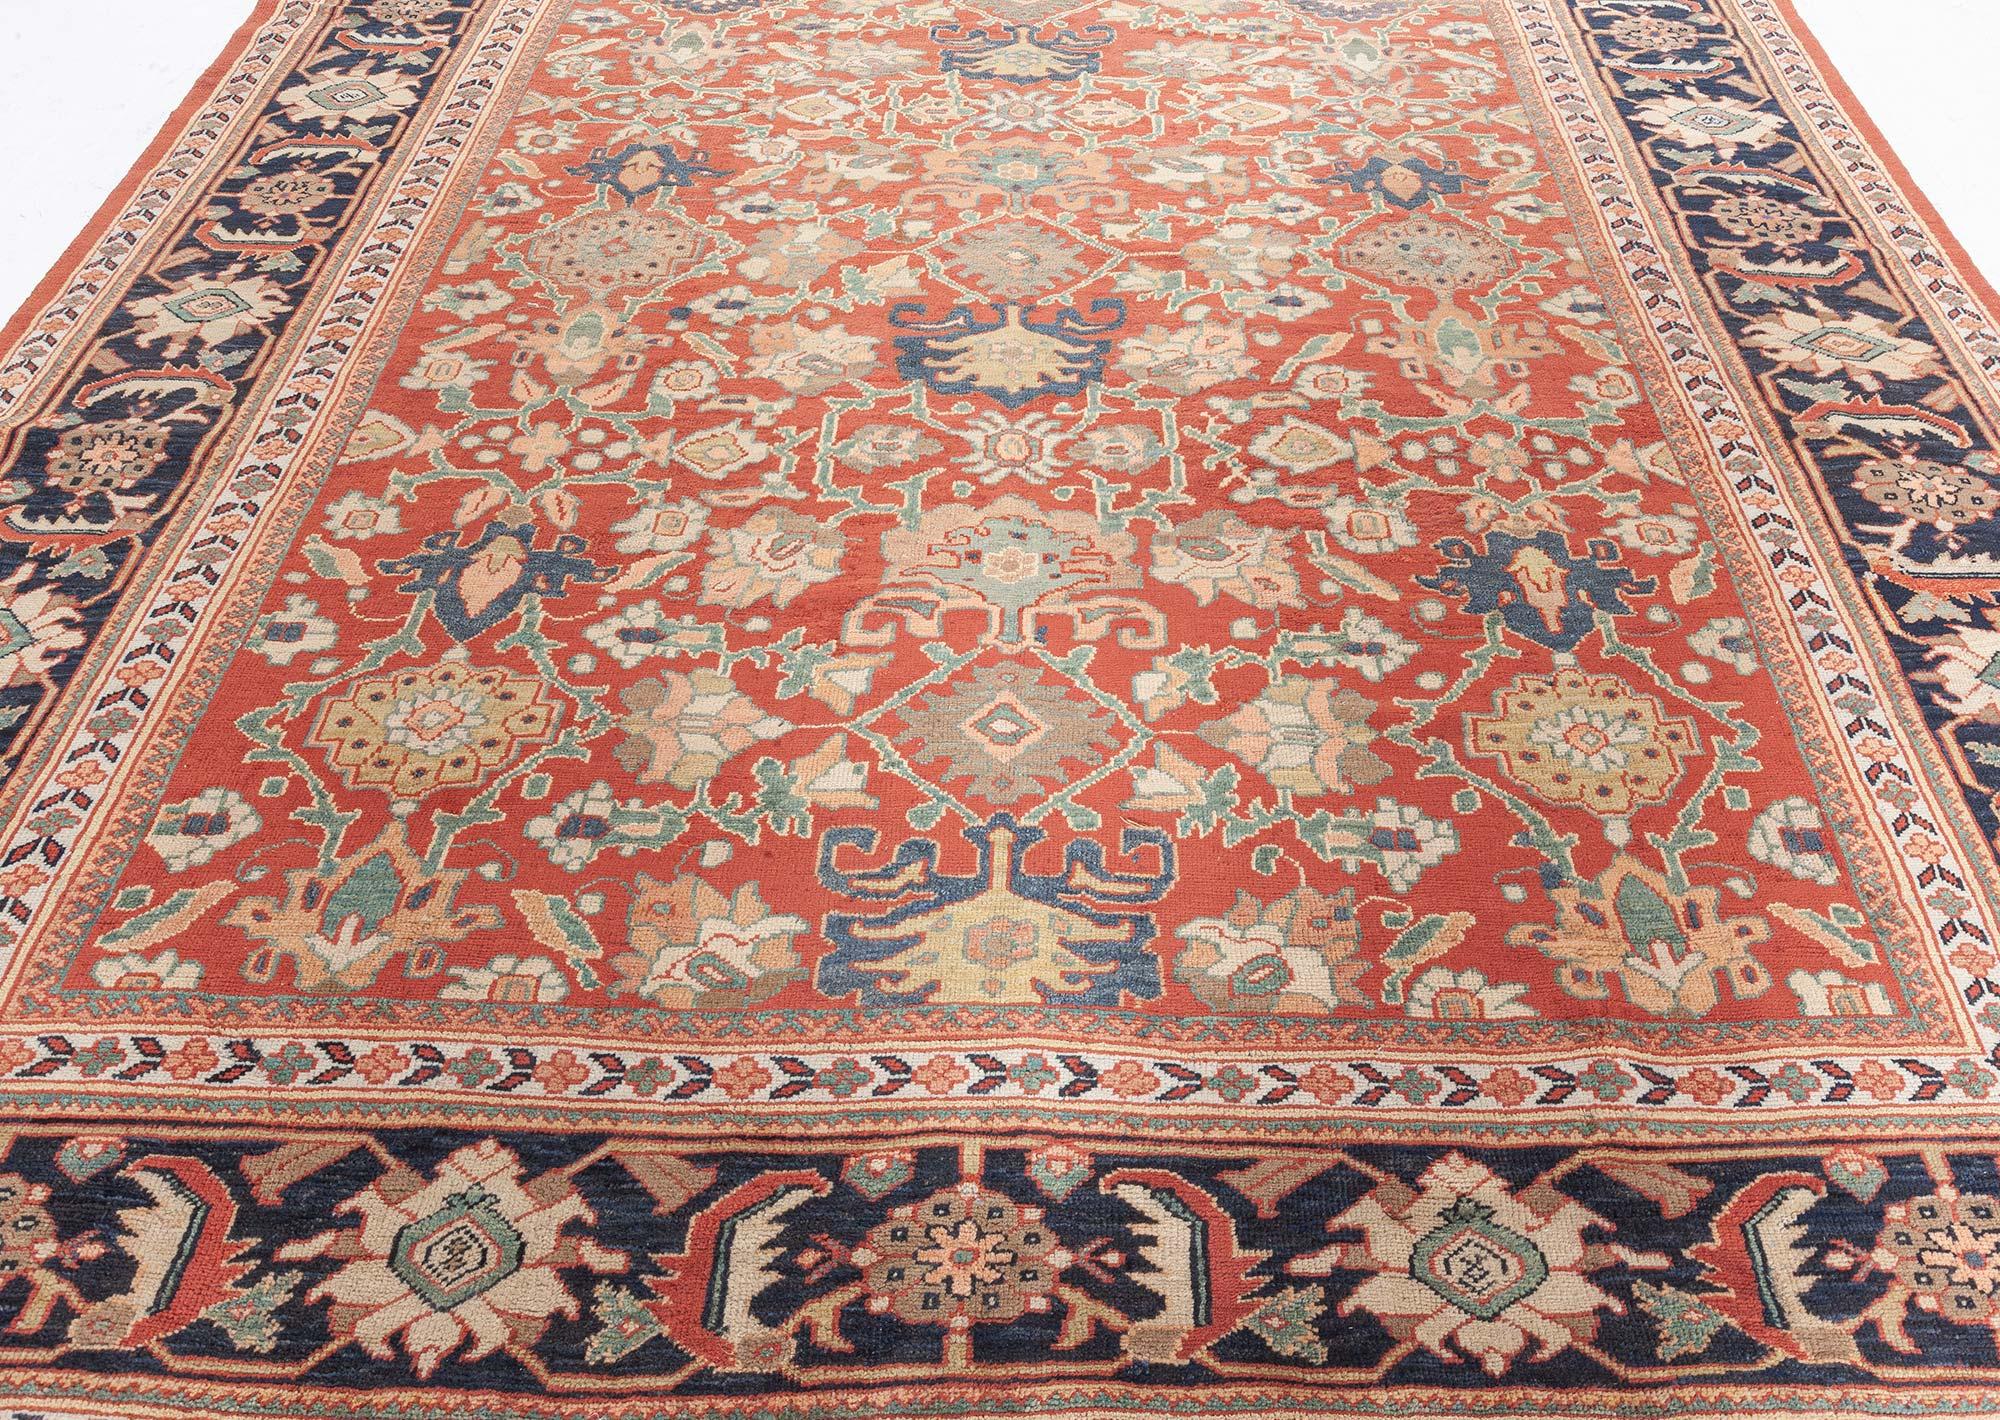 Antique Persian Sultanabad Rug
Size: 9'0